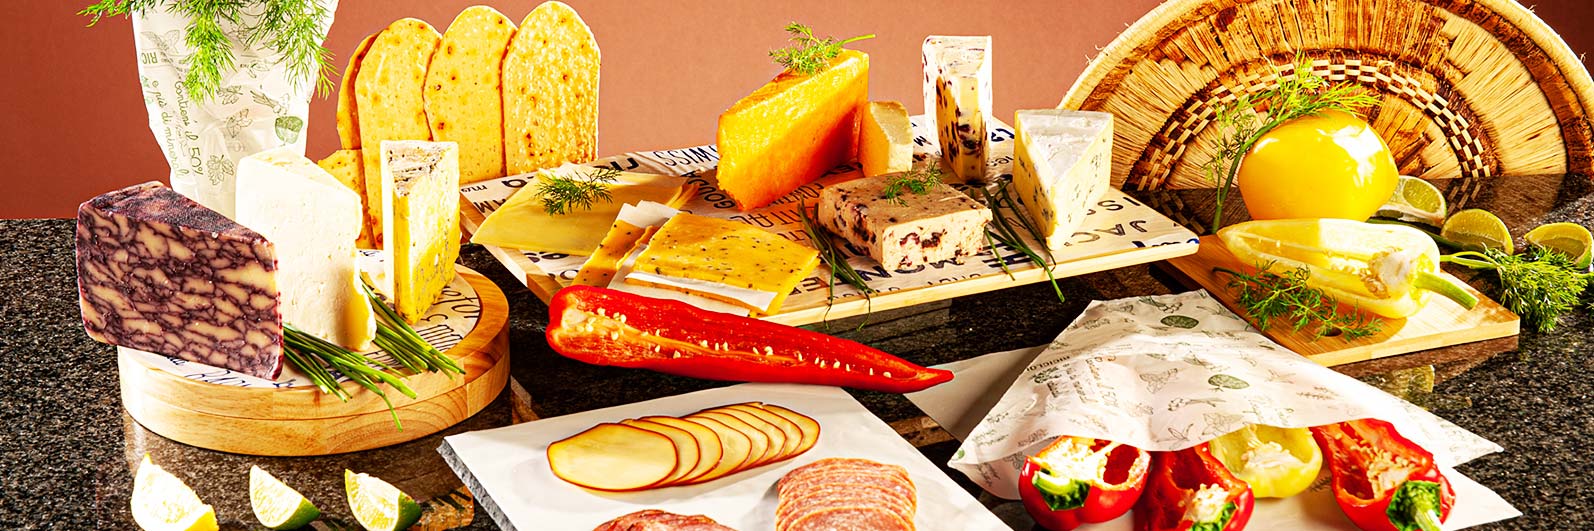 Suppliers of Recyclable Food Packaging Options